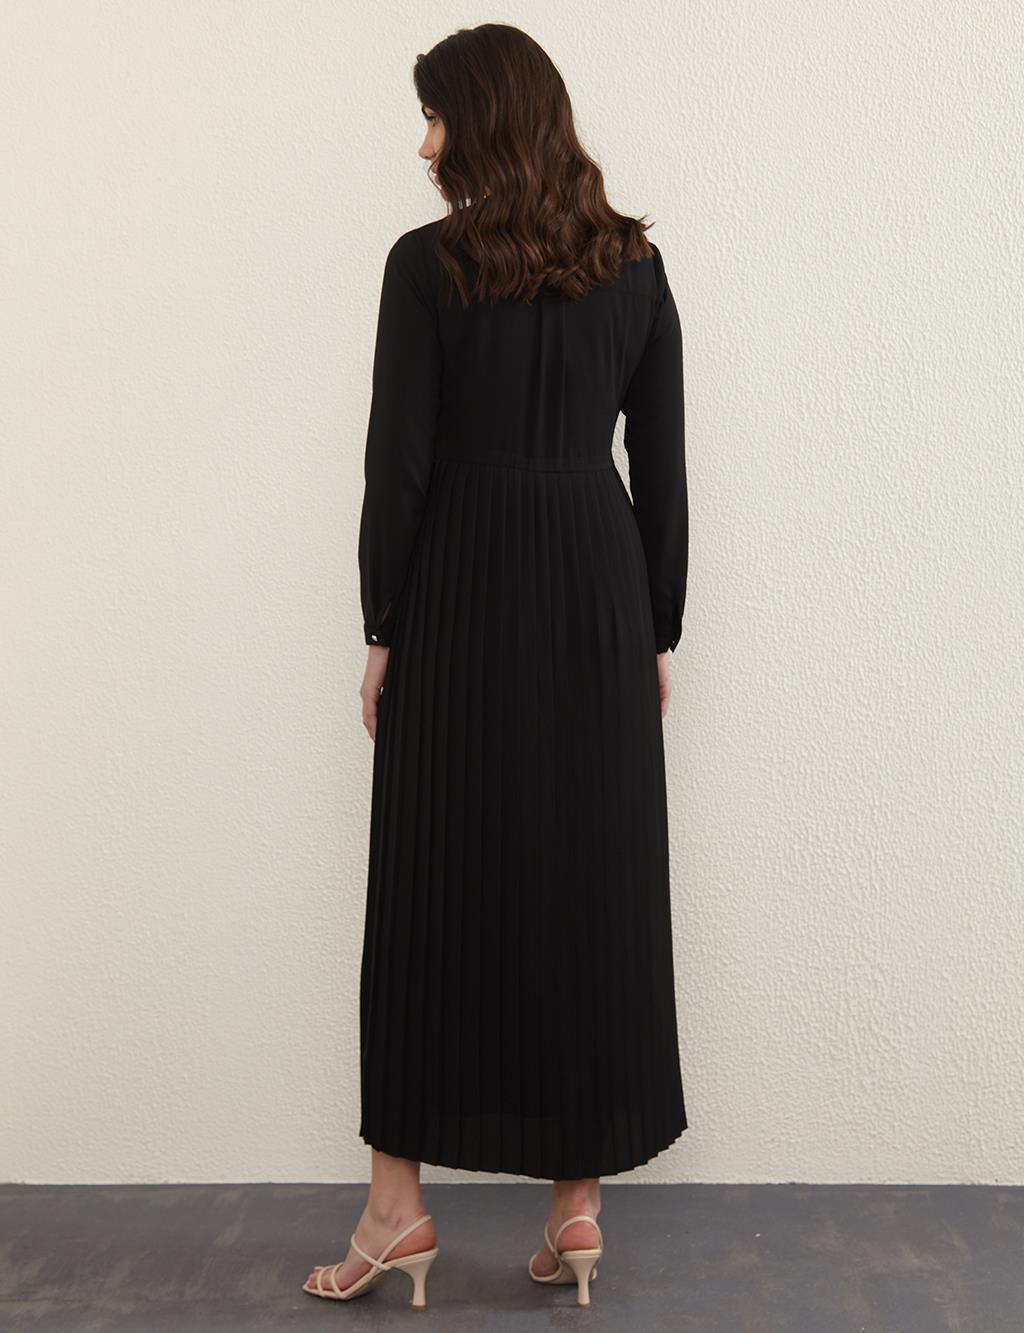 Round Neck Dress With Pleated Skirt B21 23010 Black